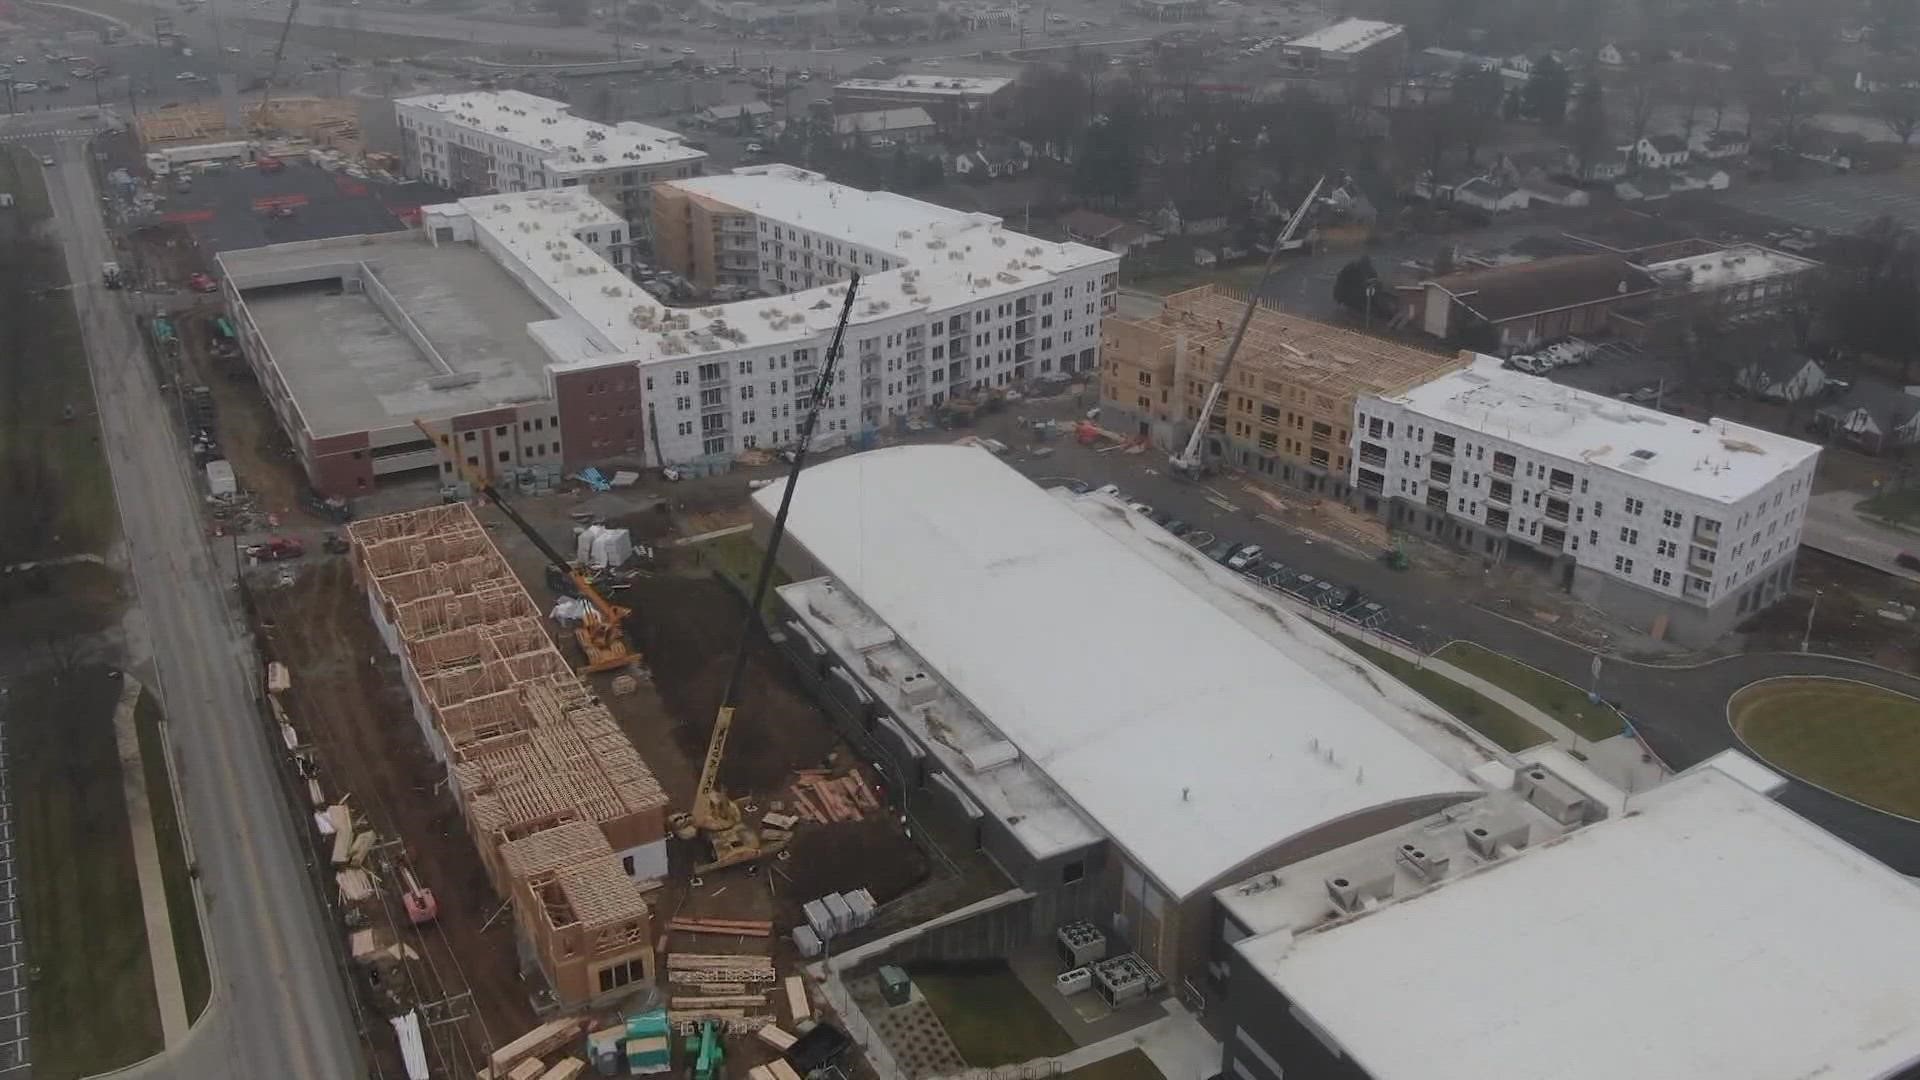 13News got an inside look at a major new high-end housing, restaurant and retail development on the south side.